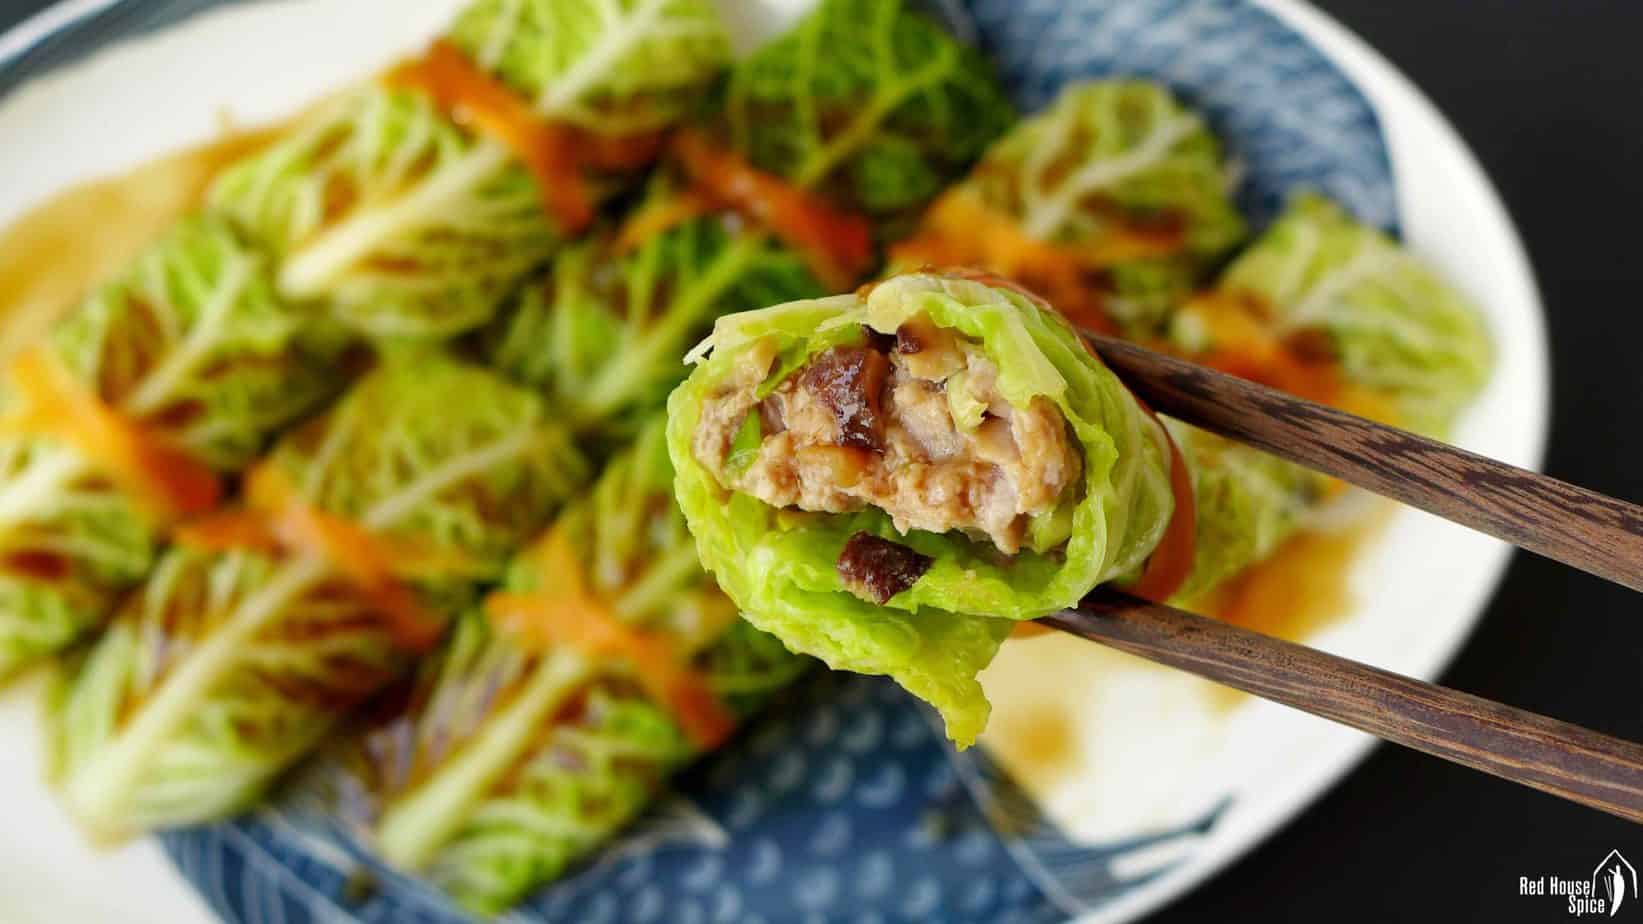 A cabbage roll filled with pork & mushrooms